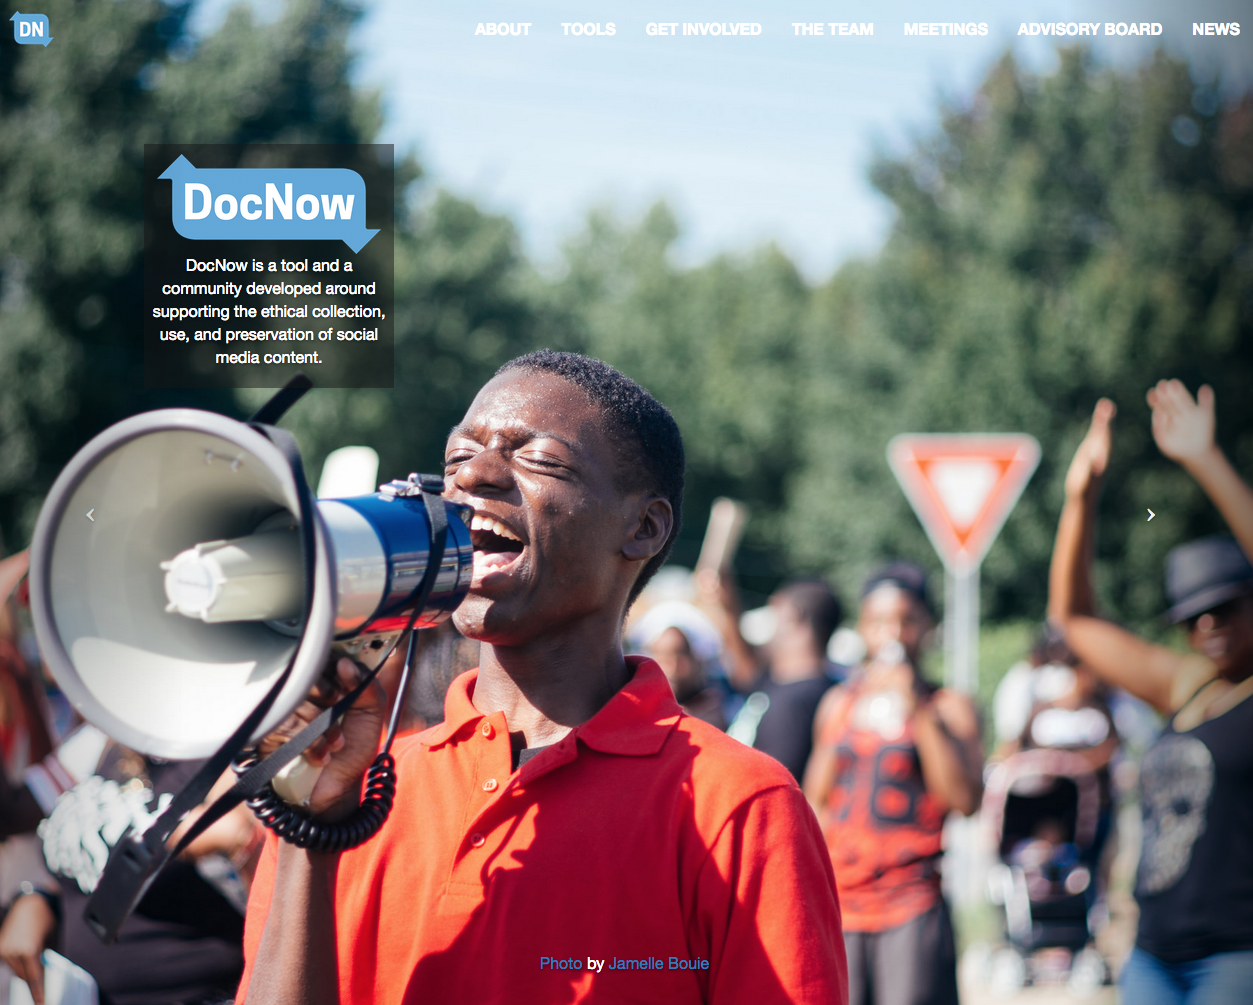 A crowd gathers behind an African American man shouting into a megaphone. Superimposed on this image is the logo for the DocNow project.